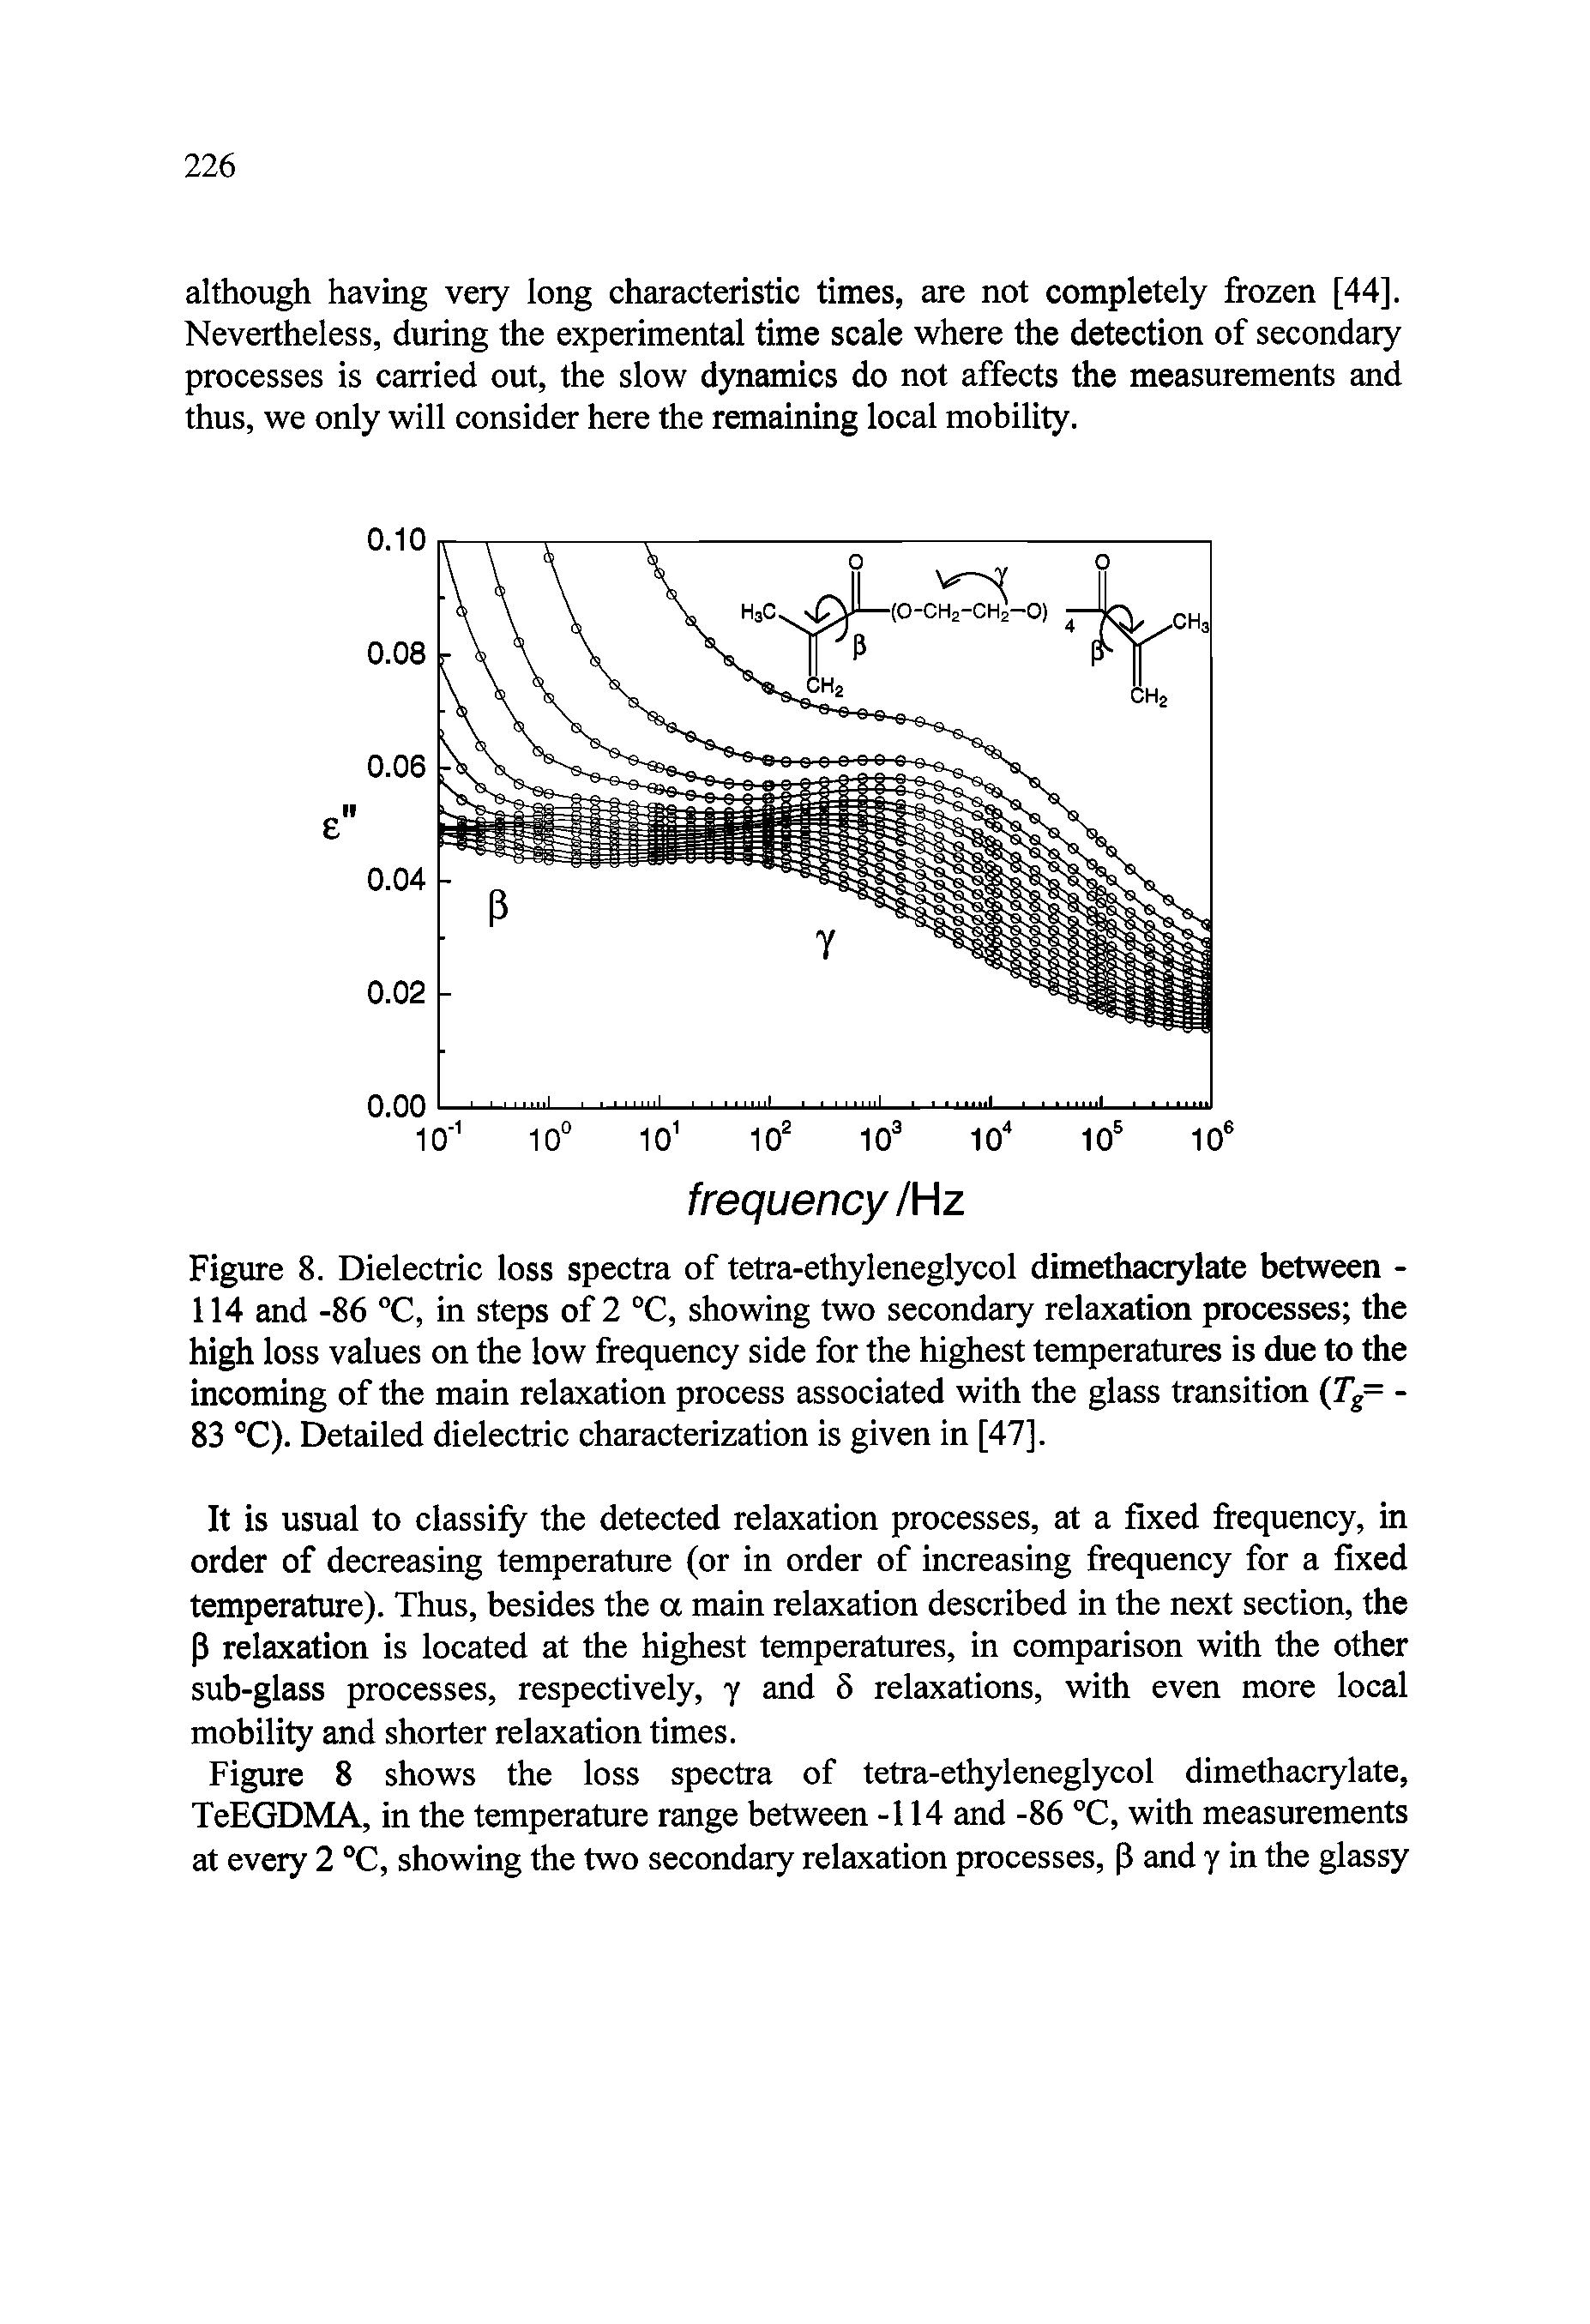 Figure 8. Dielectric loss spectra of tetra-ethyleneglycol dimethacrylate between -114 and -86 °C, in steps of 2 °C, showing two secondary relaxation processes the high loss values on the low frequency side for the highest temperatures is due to the incoming of the main relaxation process associated with the glass transition (Tg= -83 C). Detailed dielectric characterization is given in [47].